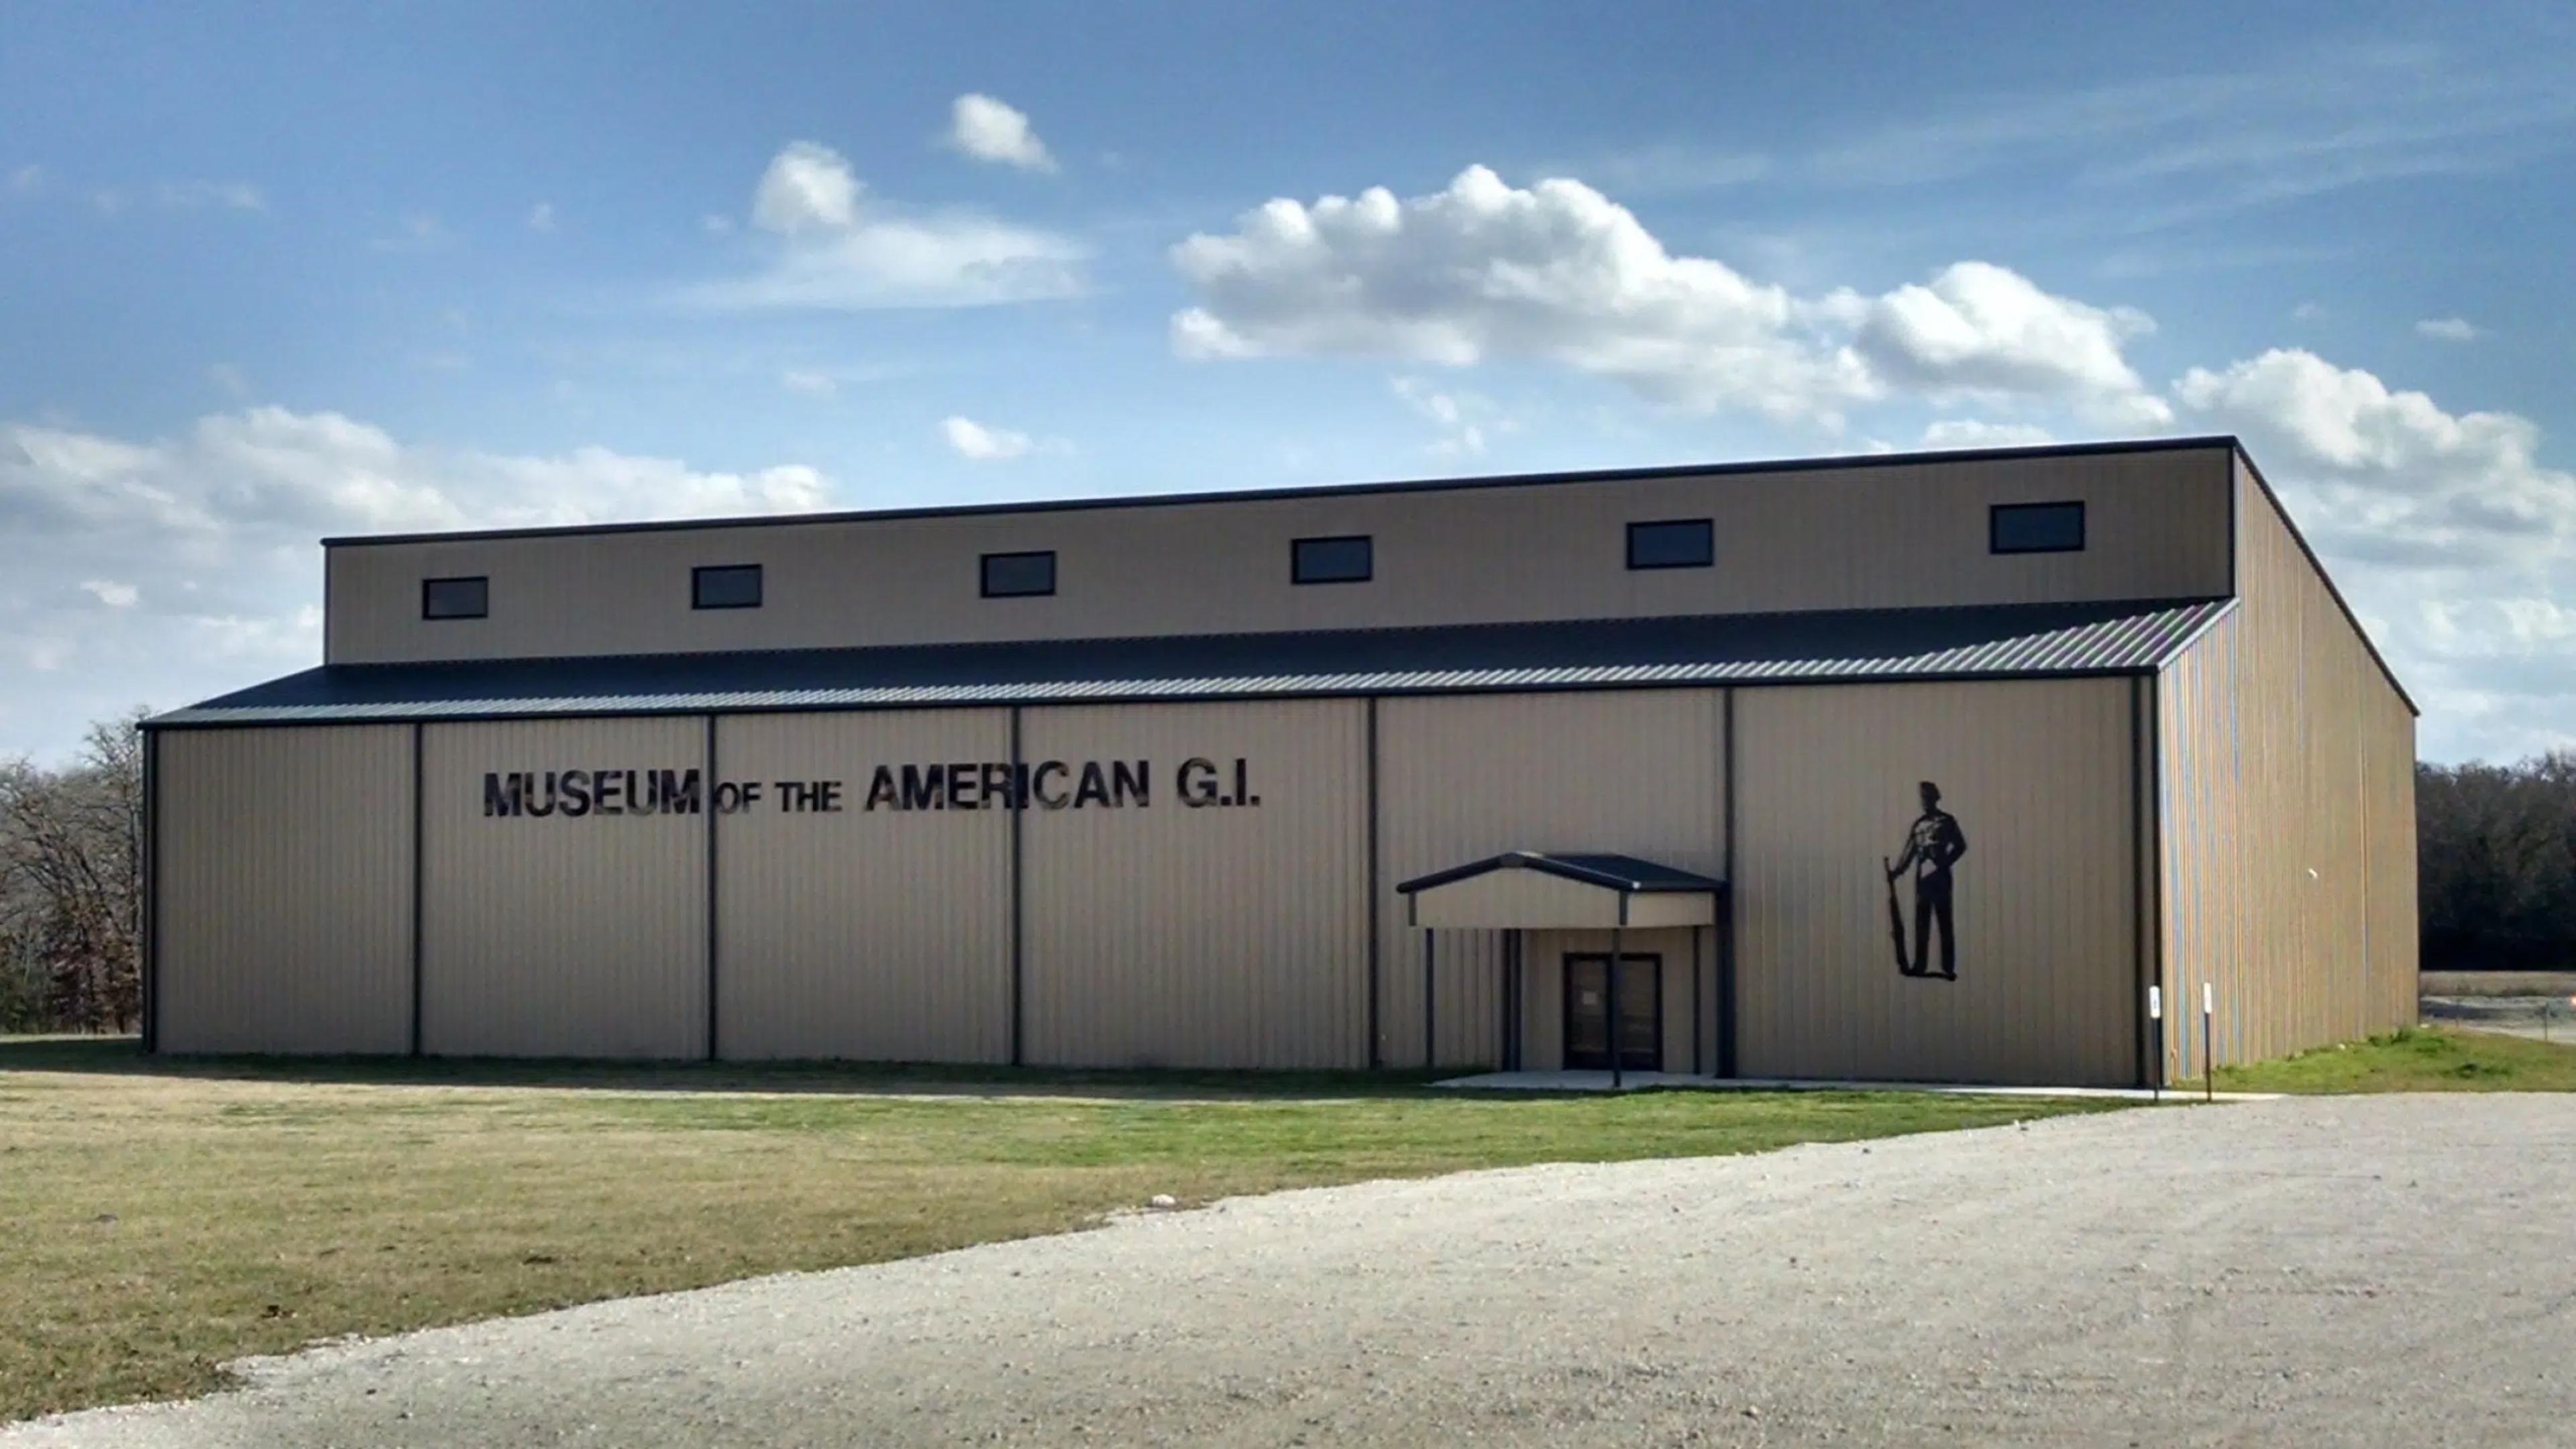 Museum of the American GI